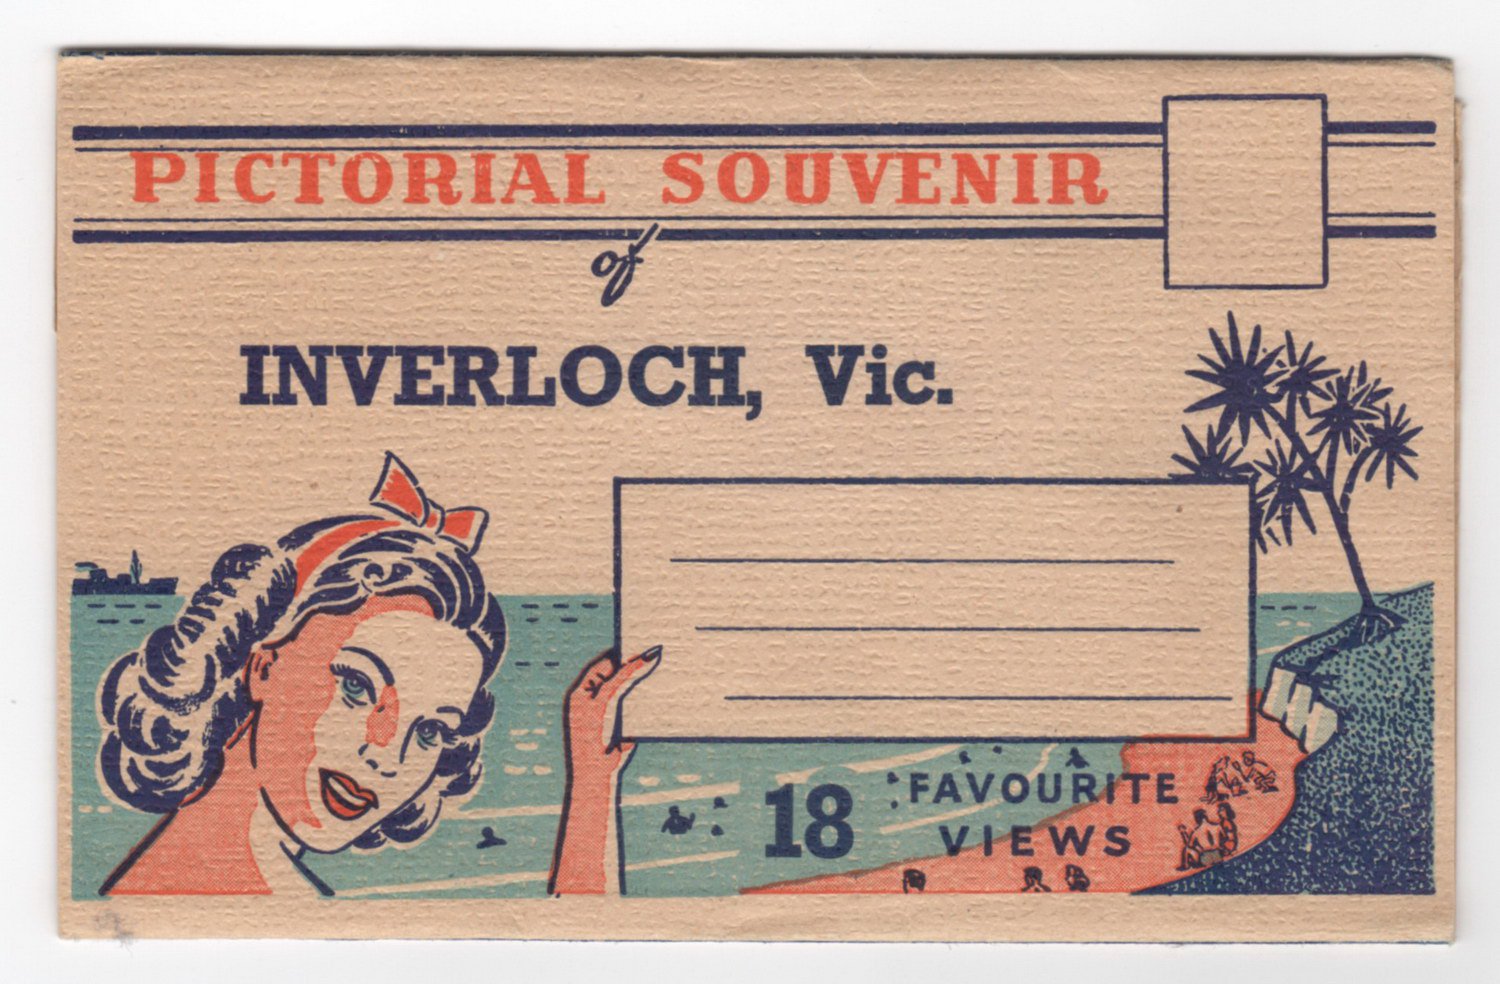 Inverloch souvenir cover. From a pictorial souvenir purchased from the Sea Shed around 2005. Photo dates from the late 1940's